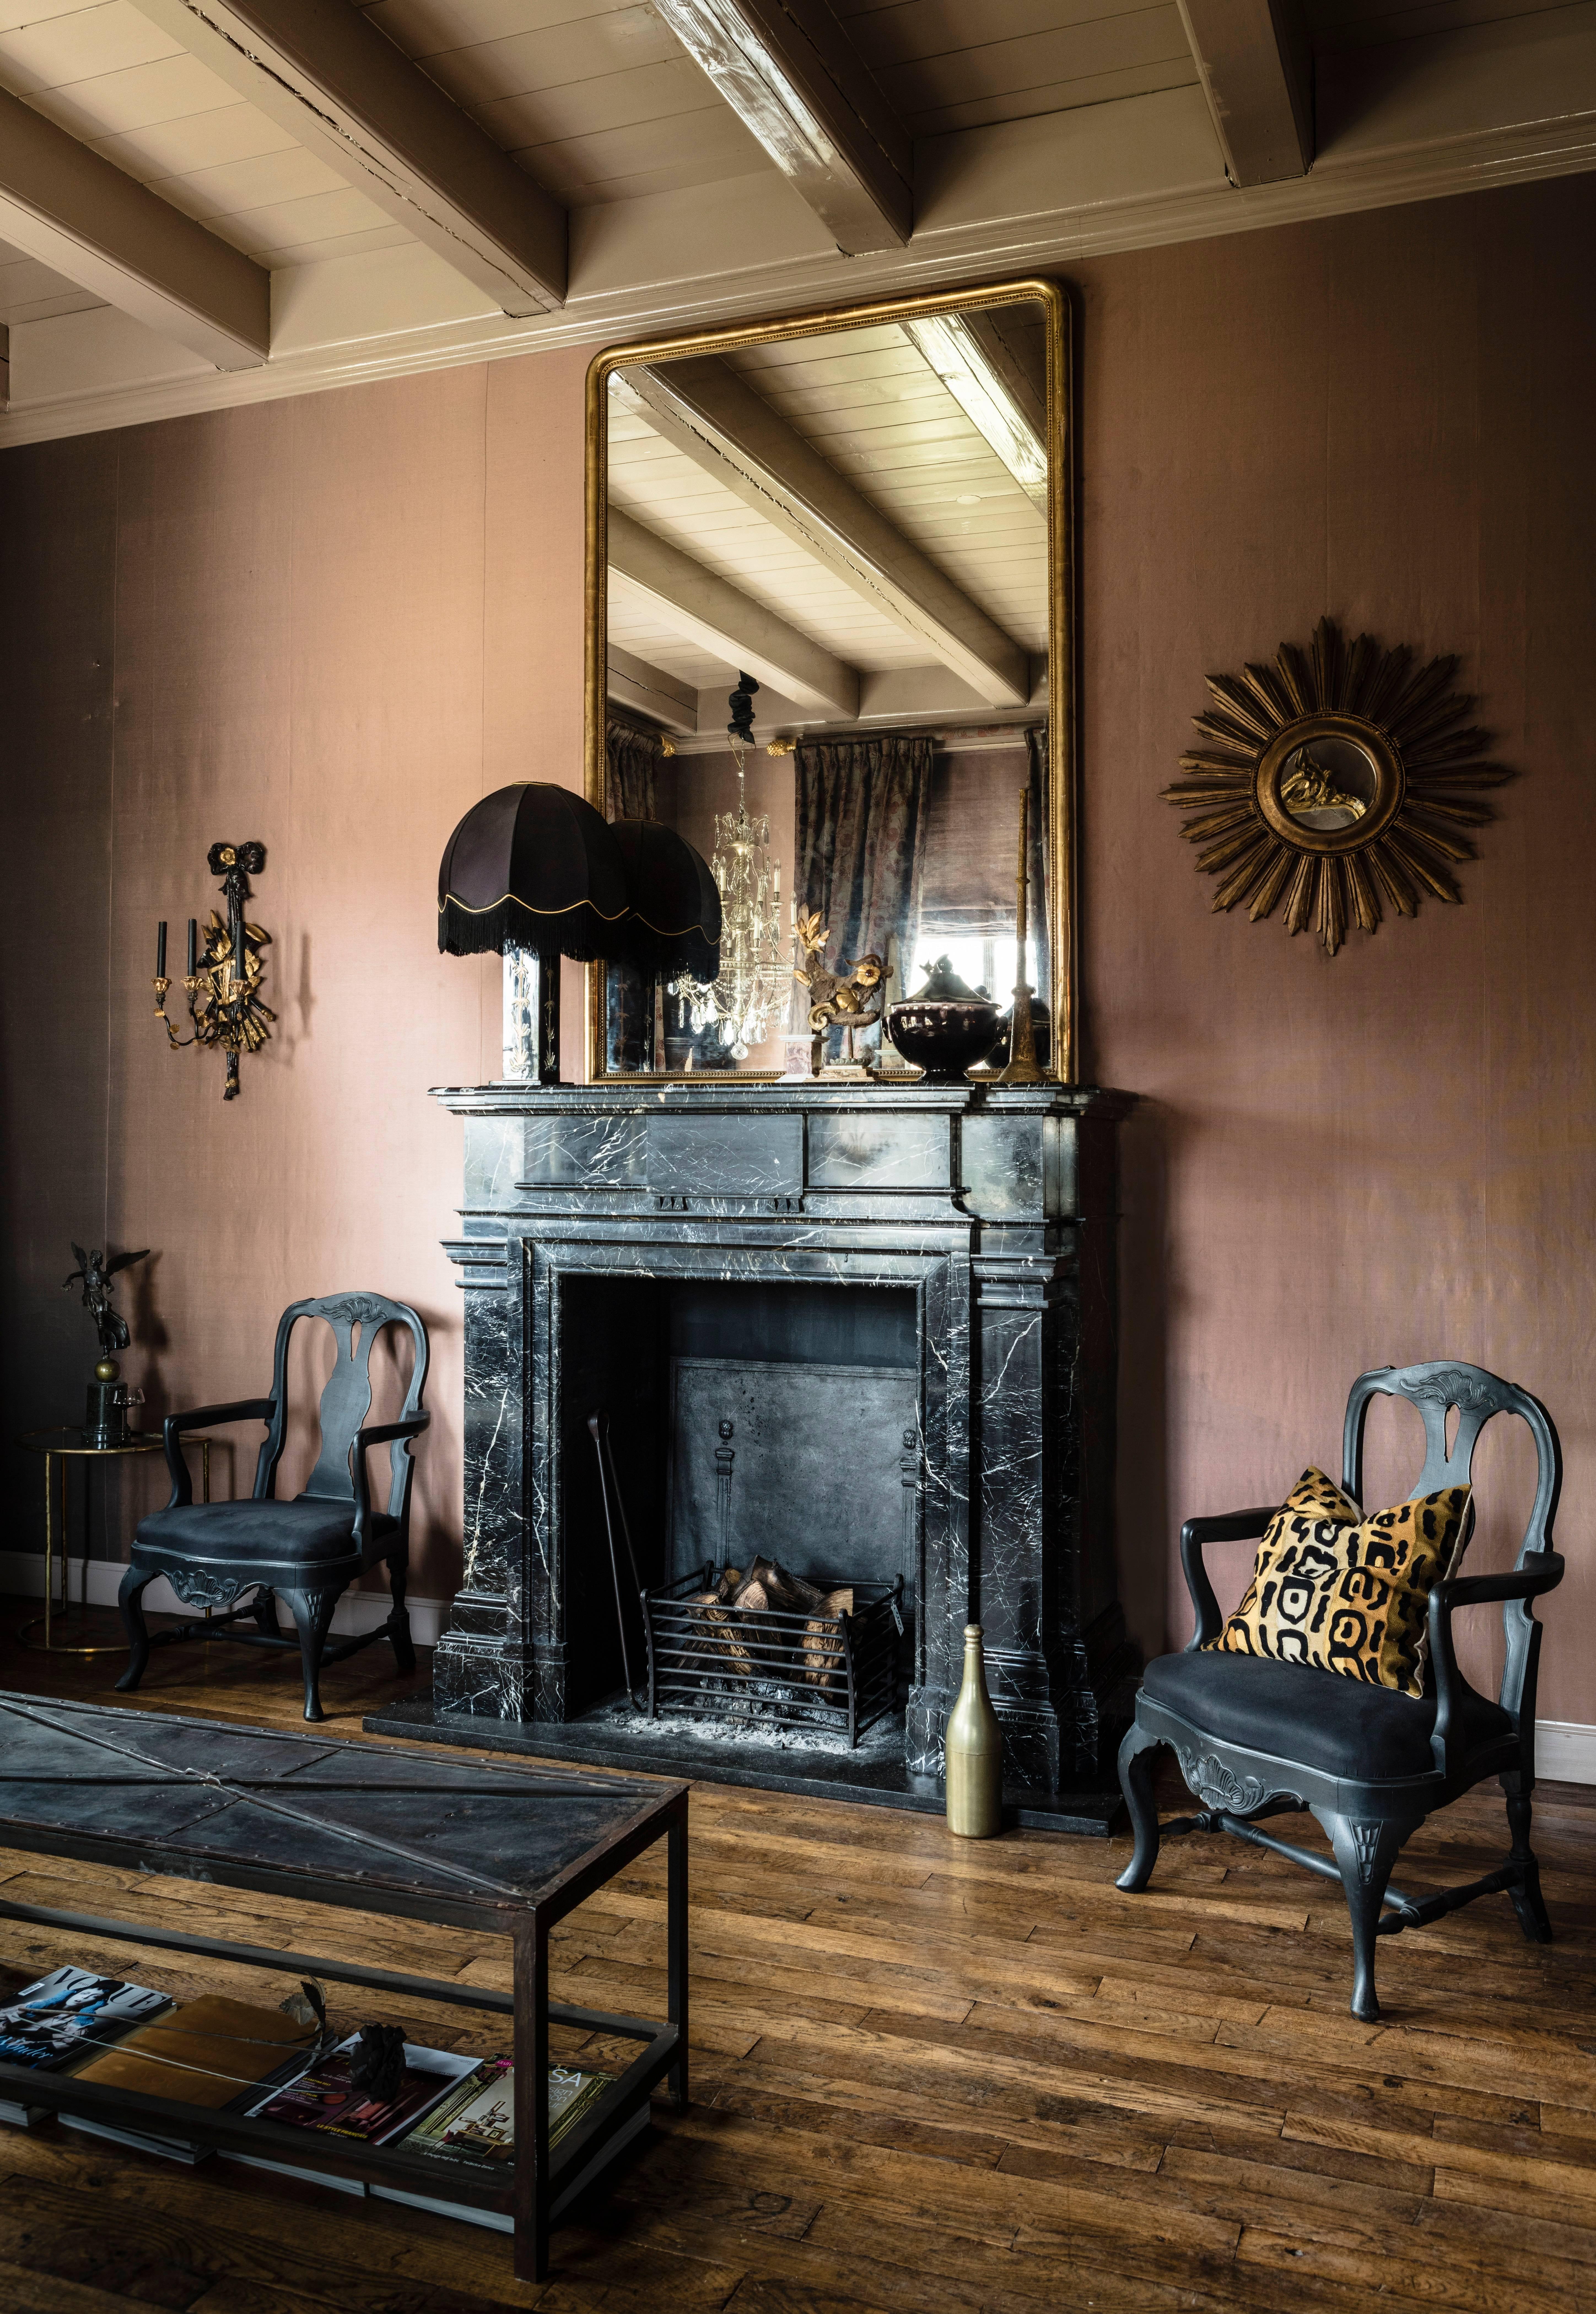 Beautiful large late 19th century fire place made in France.
The mantel piece has a neoclassical architectural design.
Made from black Nero Marquina marble with a beautiful pattern of white veins.
The fire place is in a very good condition.